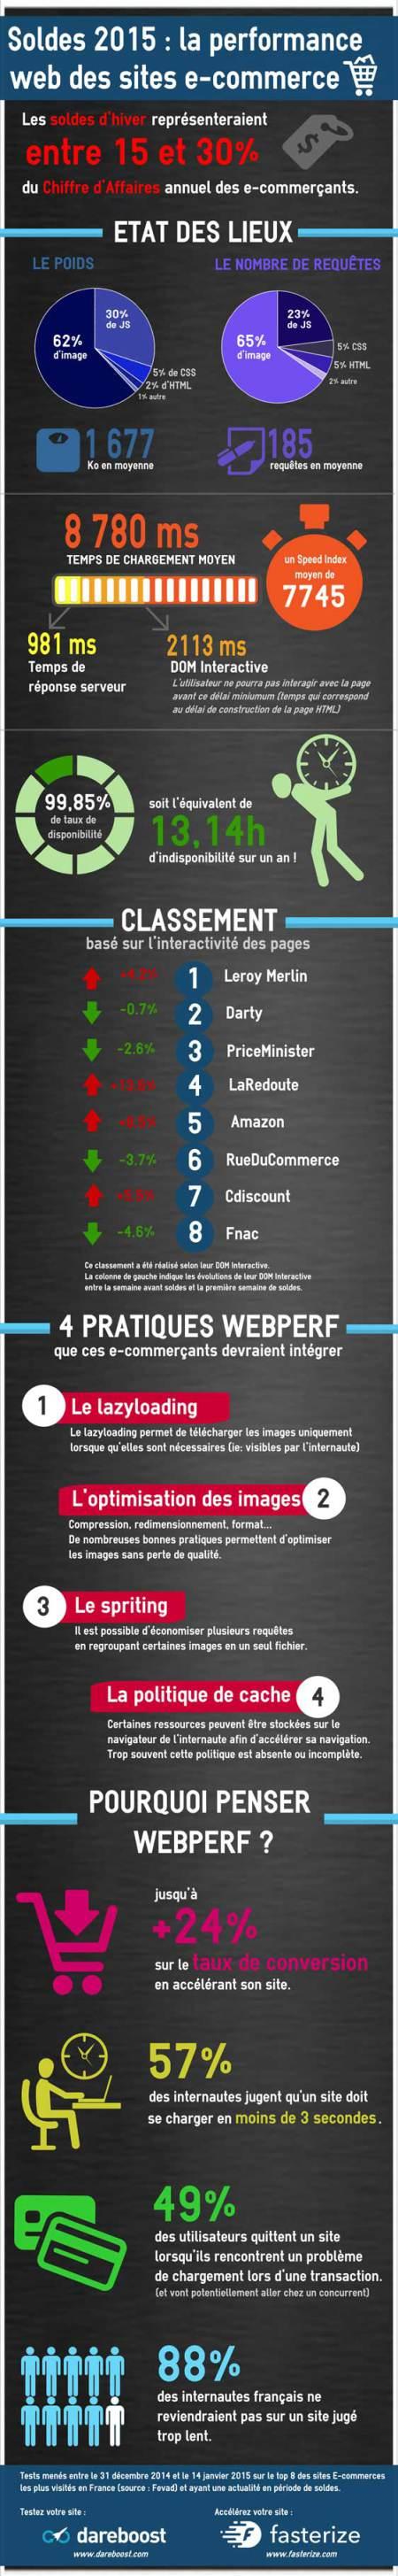 infographie-performance-ecommerce-soldes